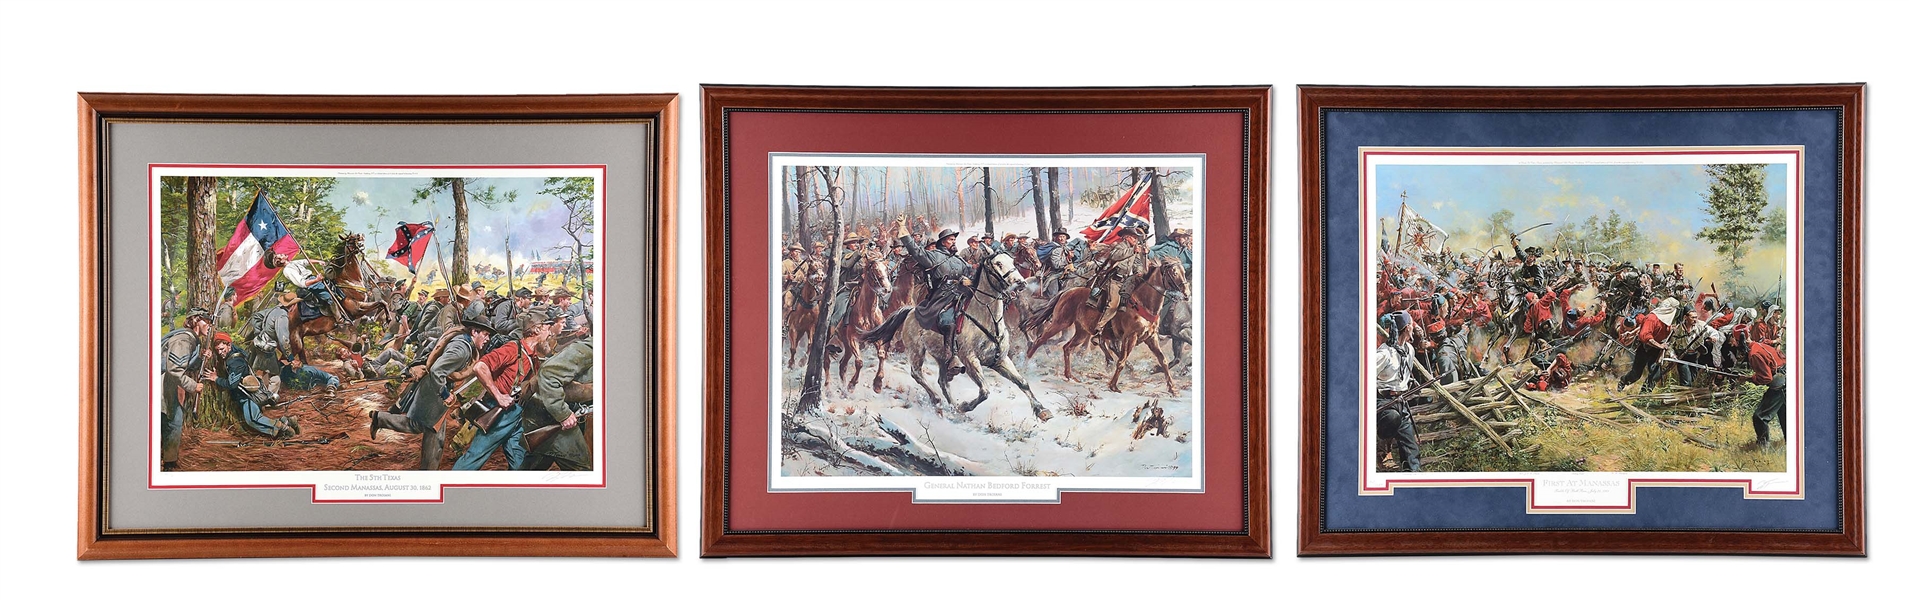 LOT OF 3: FRAMED AND SIGNED CONFEDERATE PRINTS BY DON TROIANI.